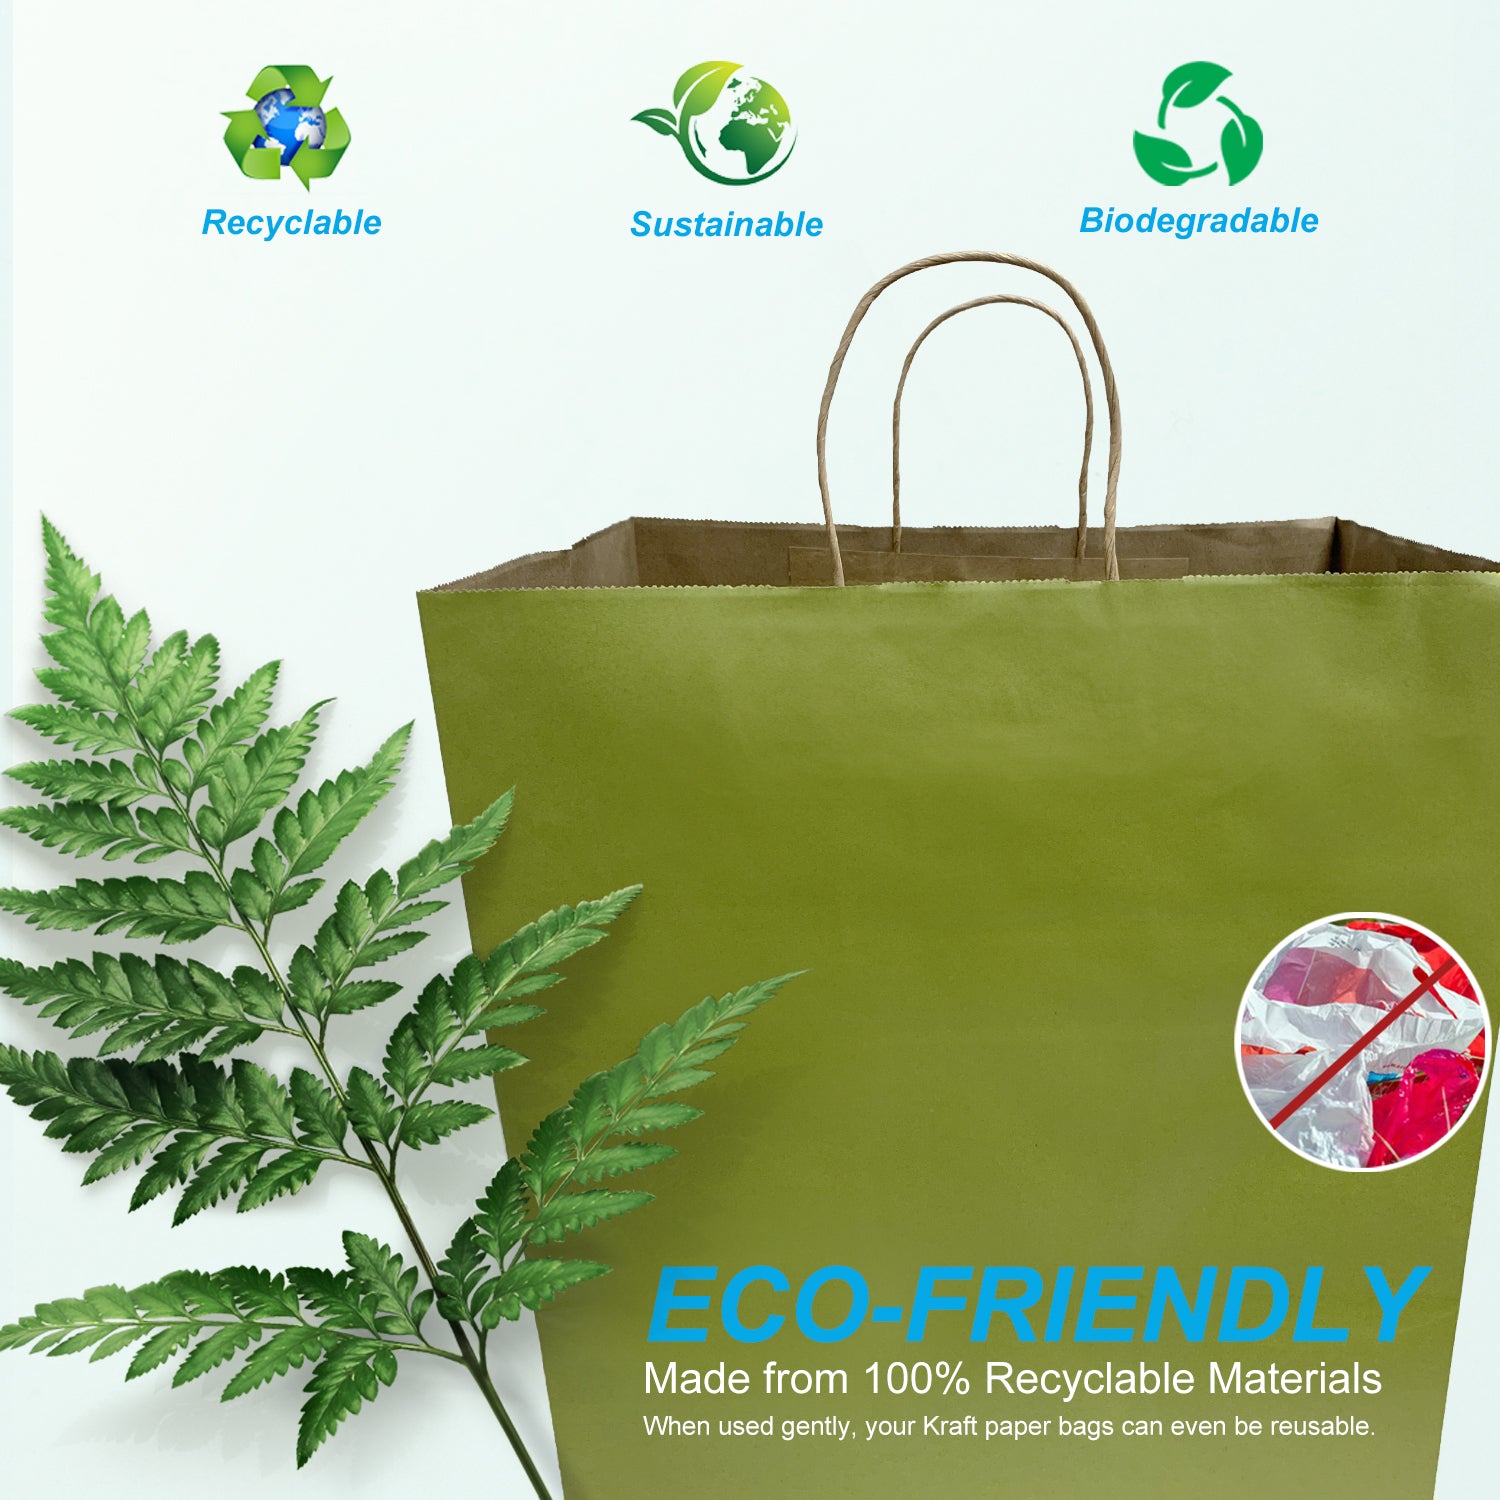 150 Pcs, Super Royal, 14x10x15.75 inches, Lime Kraft Paper Bags, with Twisted Handle